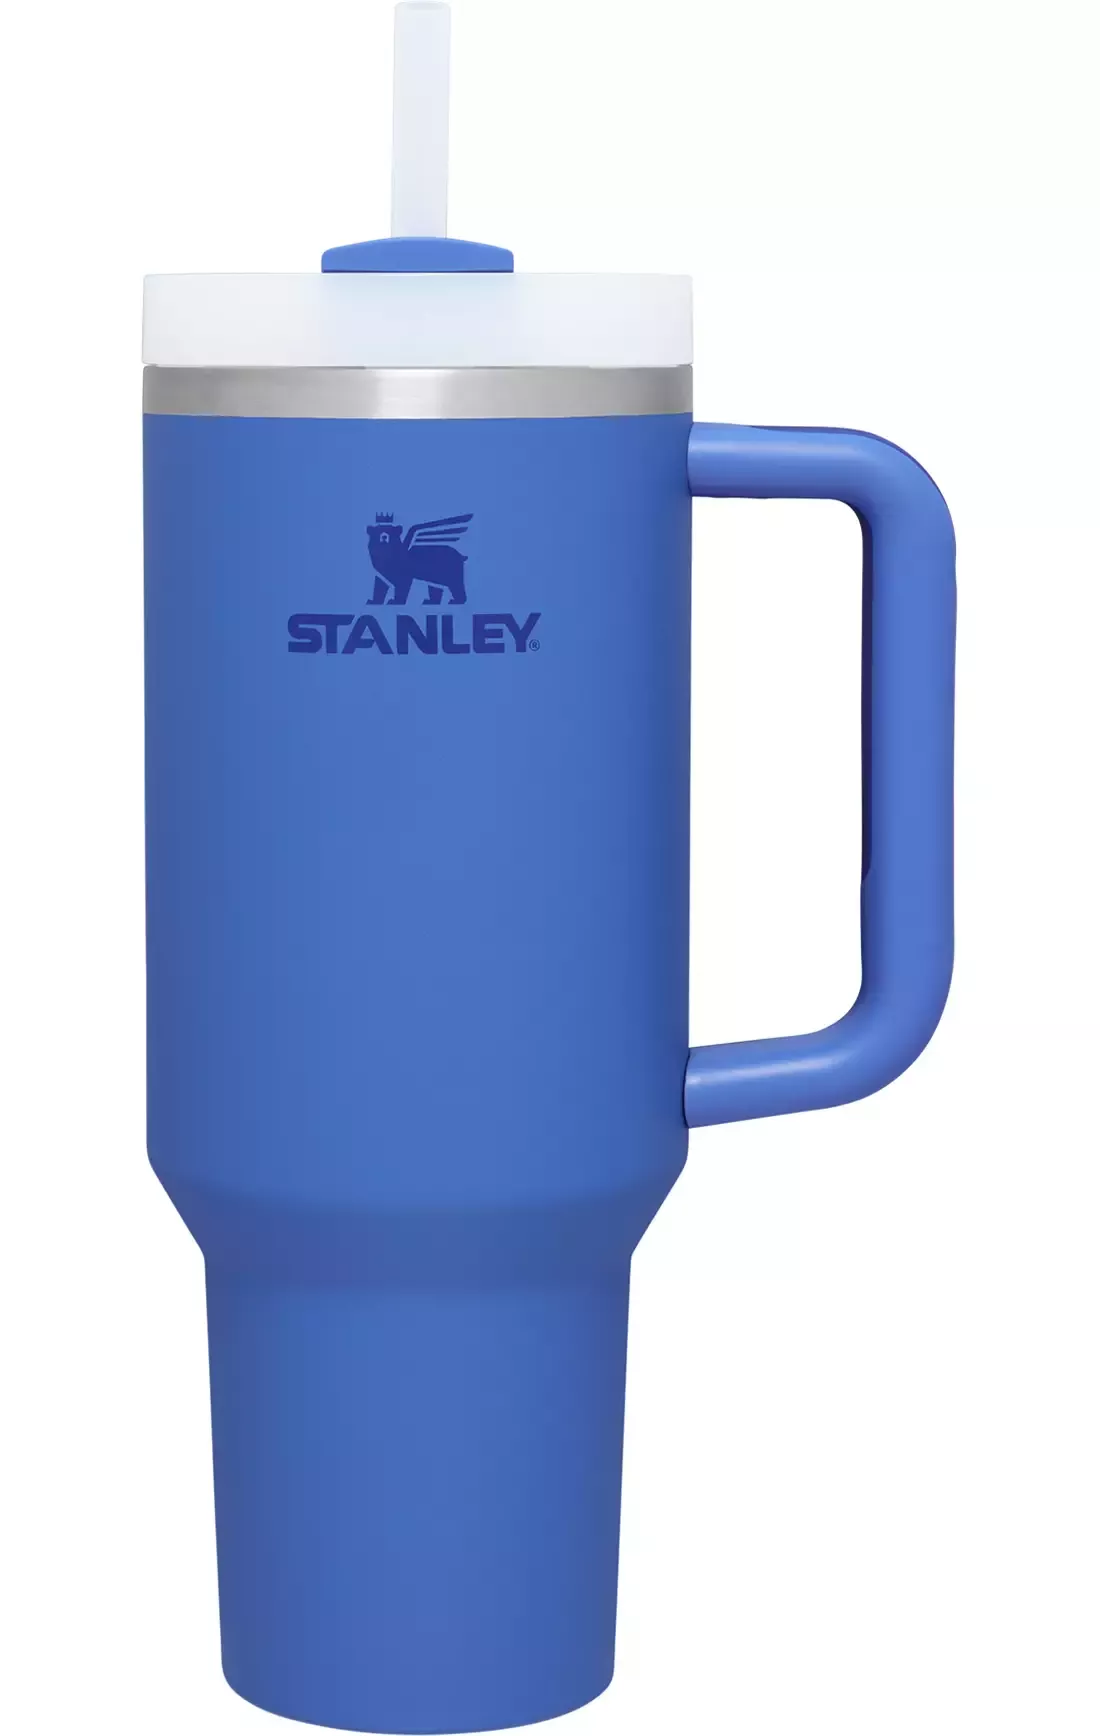 New Pool Blue Stanley 40 oz. Tumbler at Dick's Sporting Goods, now